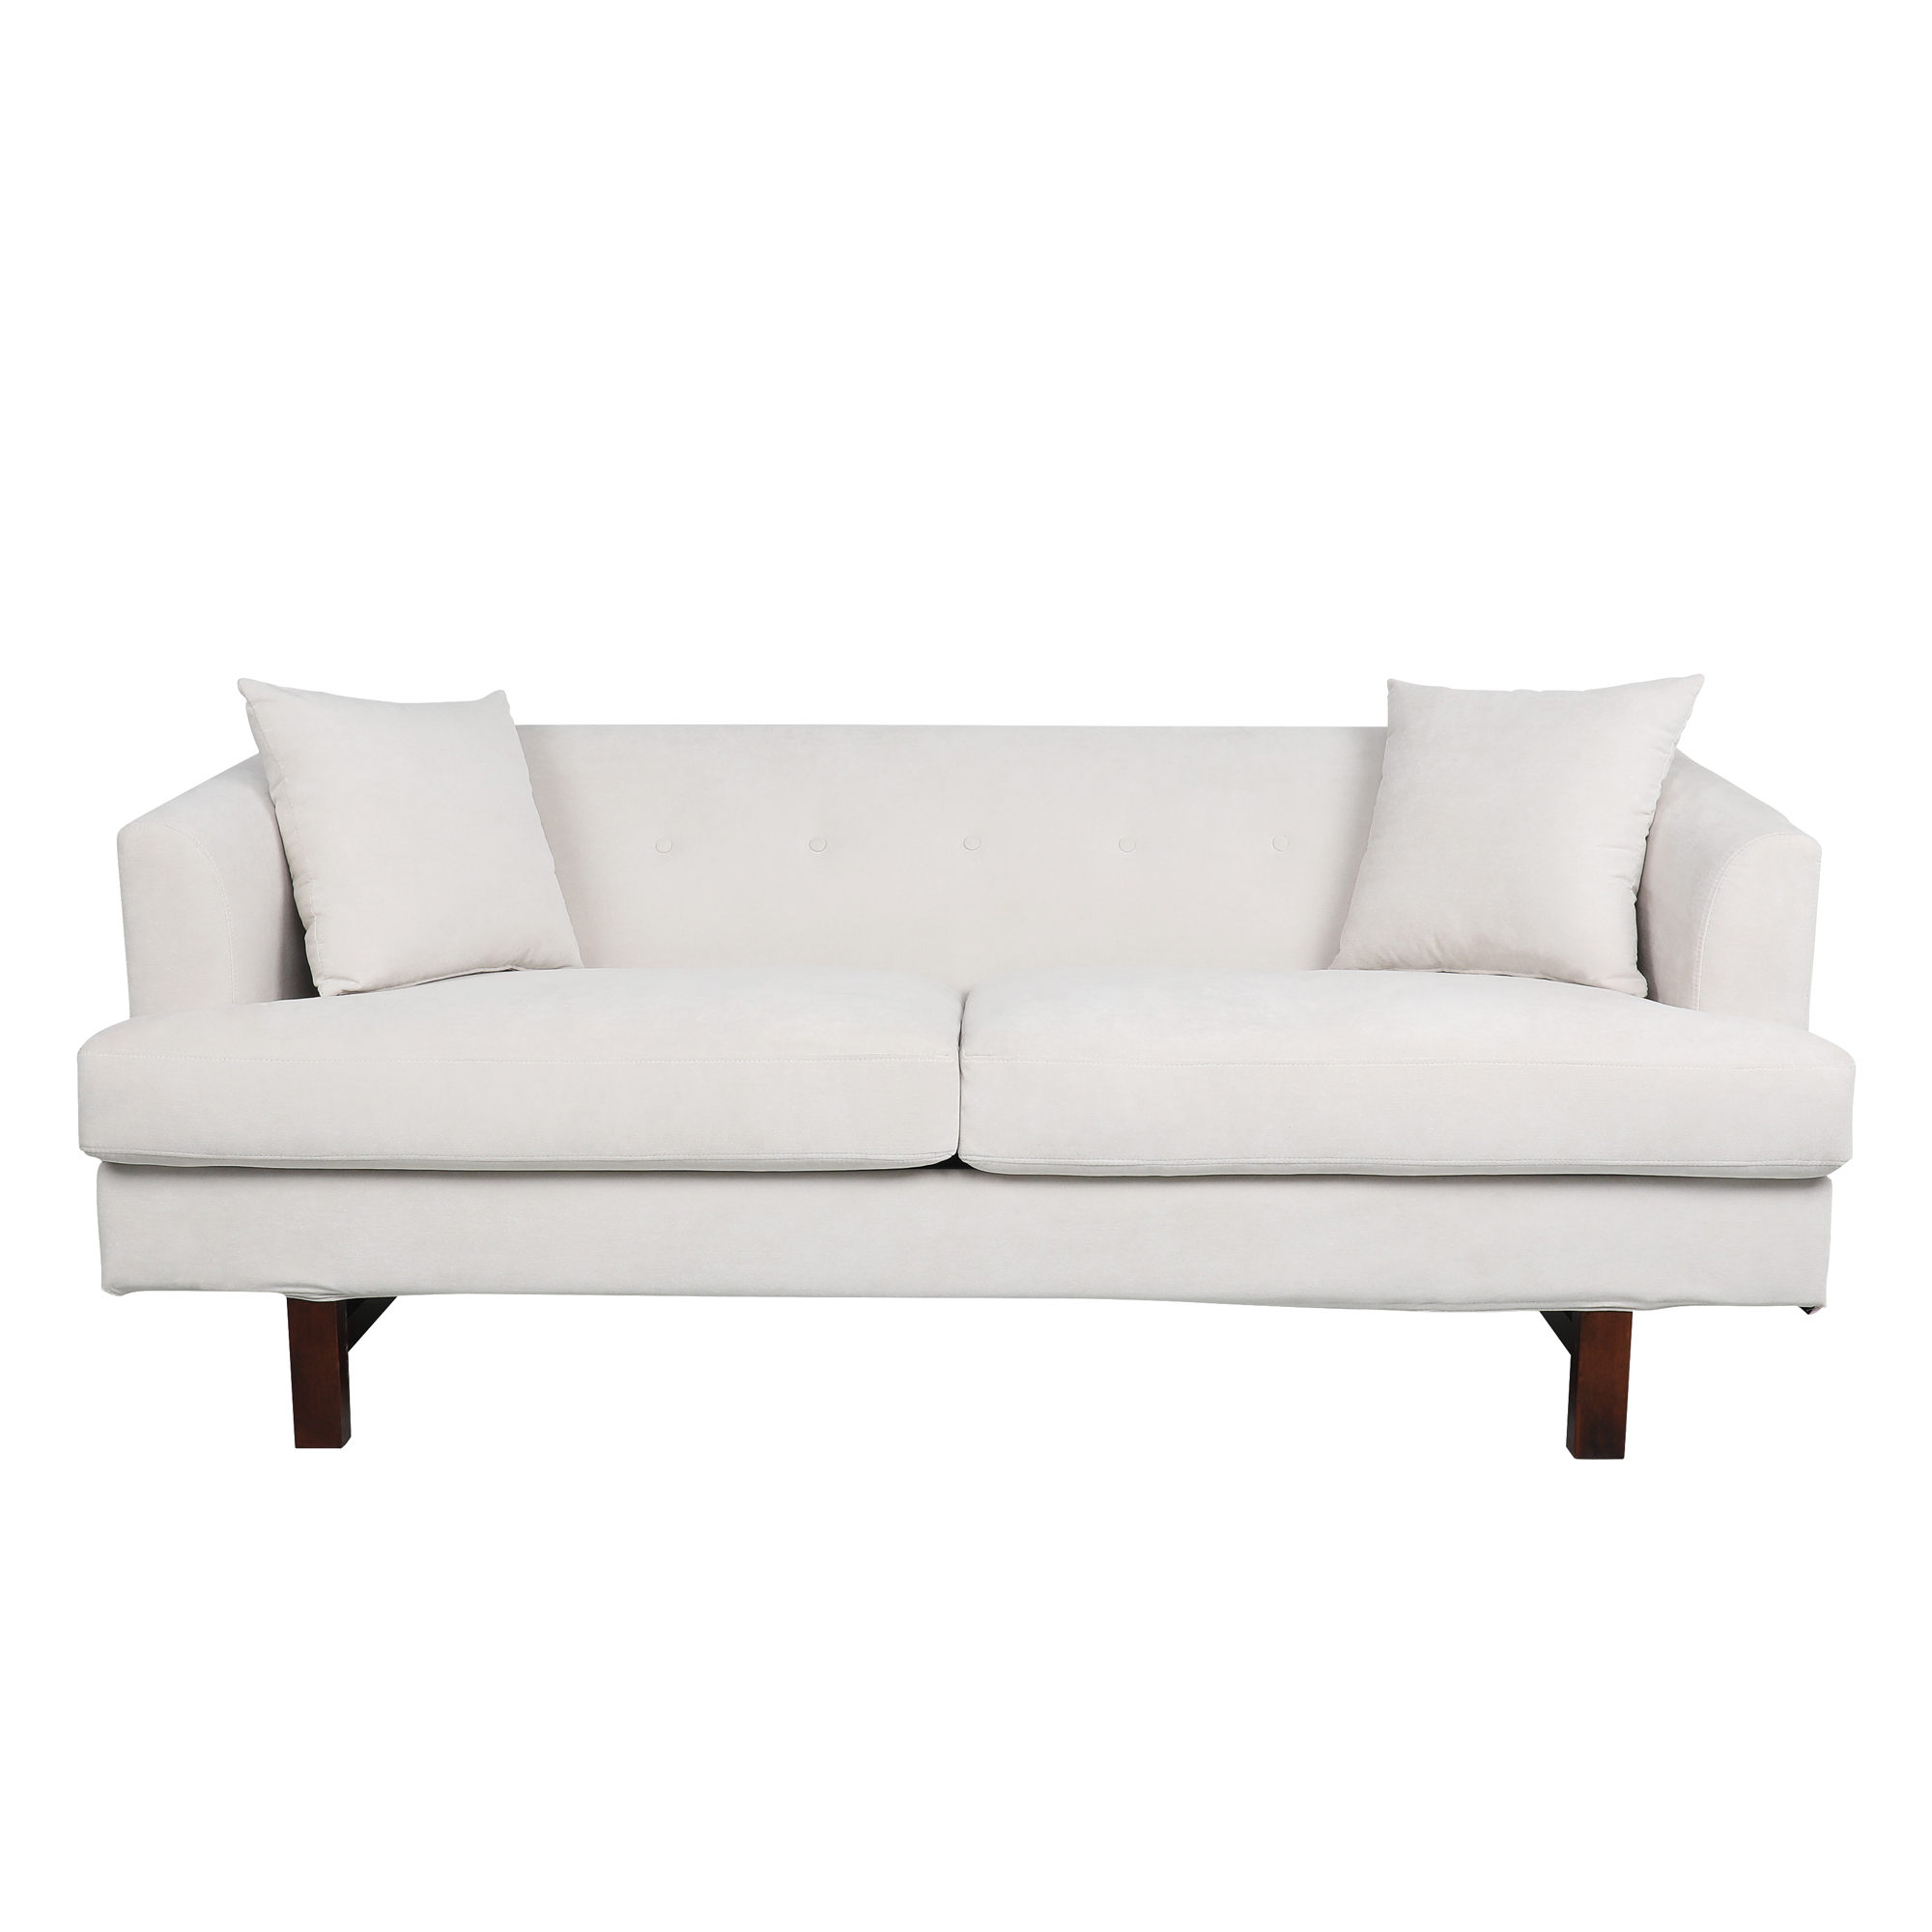 Contemporary 3 Seater Fabric Sofa with Accent Pillows